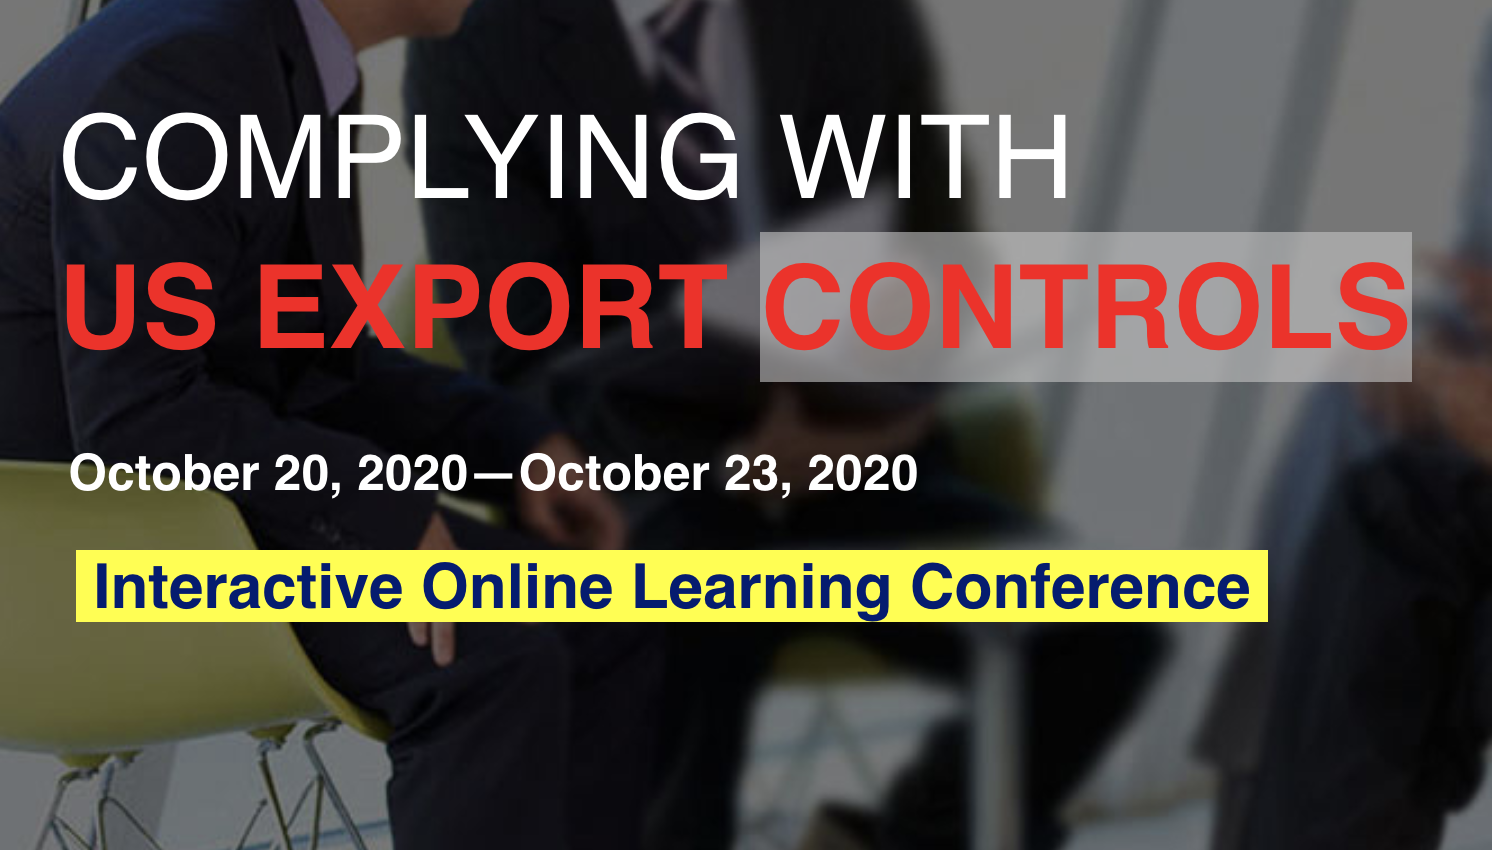 October 20-23: COMPLYING WITH US EXPORT CONTROLS